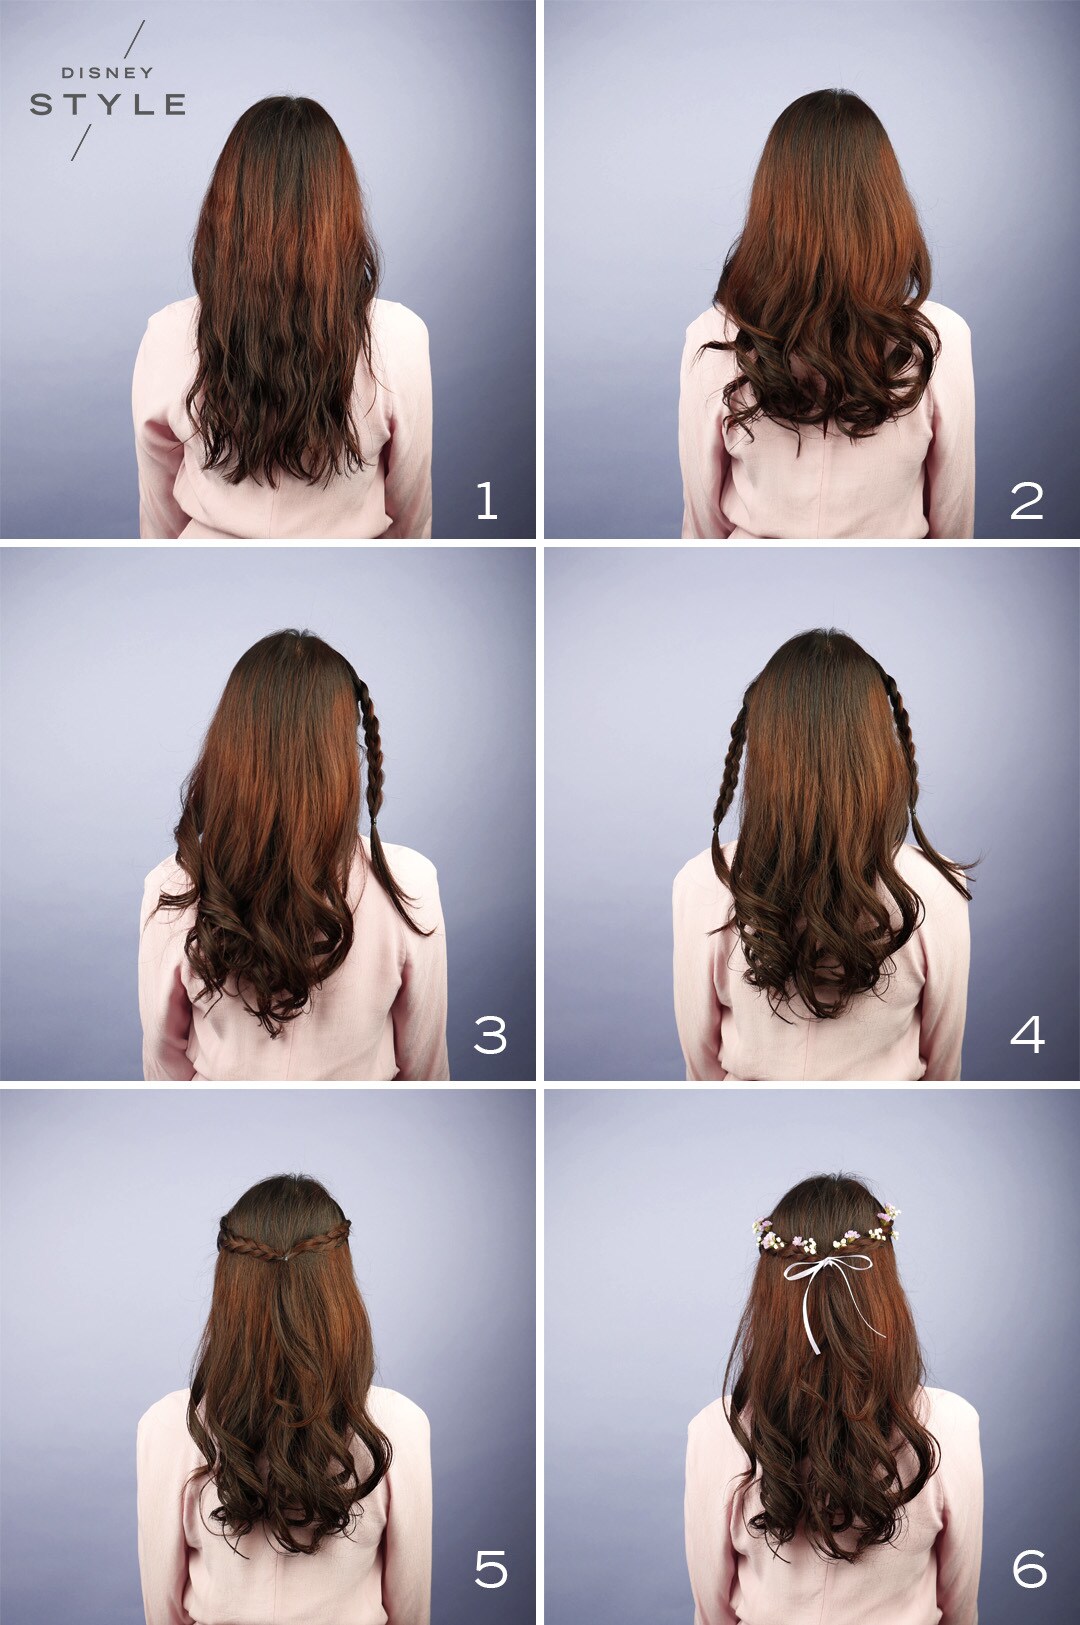 DISNEY PRINCESS HAIRSTYLES | 5 easy, quick and beautiful Disney princess  hairstyles! | By MetDaanFacebook